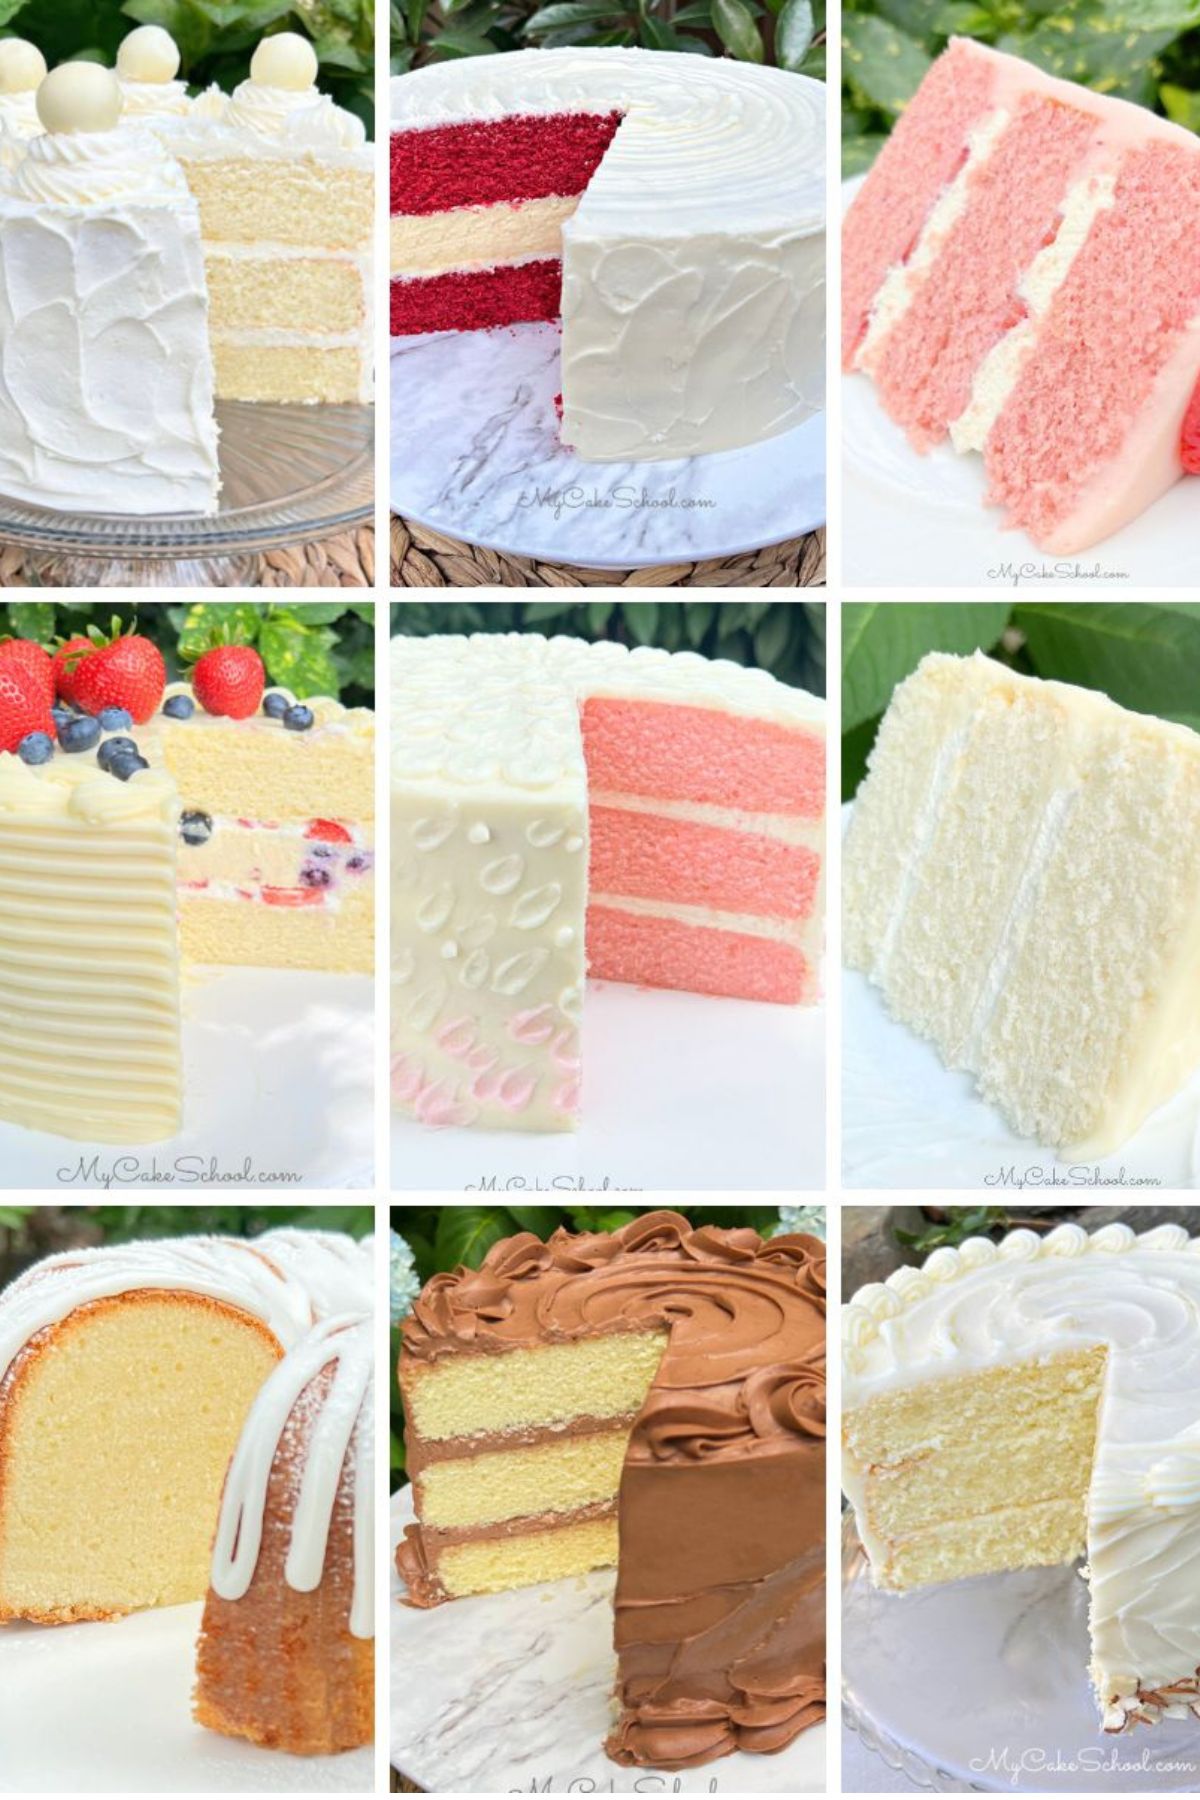 Collage of our favorite Velvet Cake Recipes